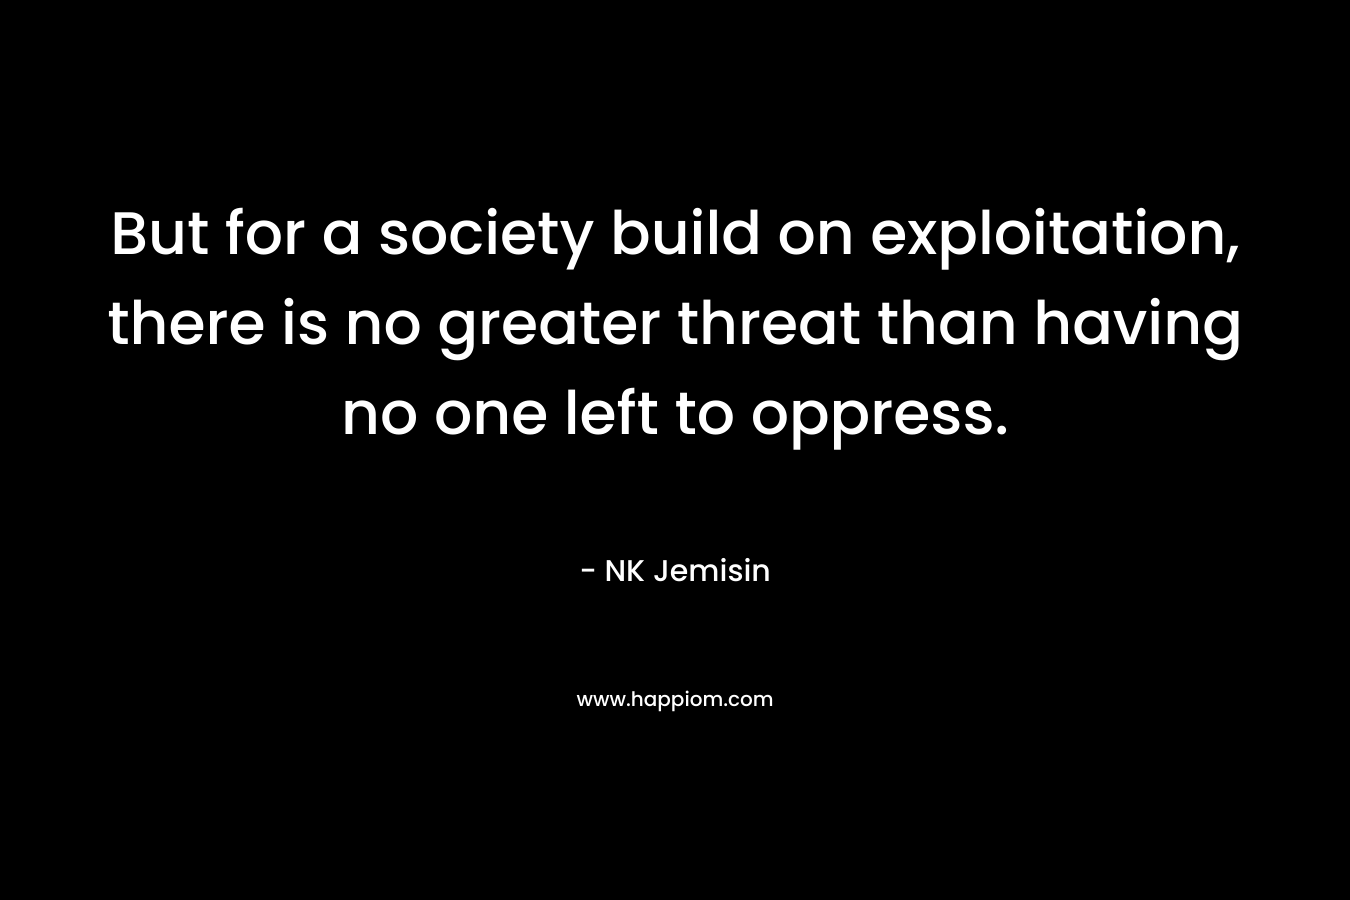 But for a society build on exploitation, there is no greater threat than having no one left to oppress.